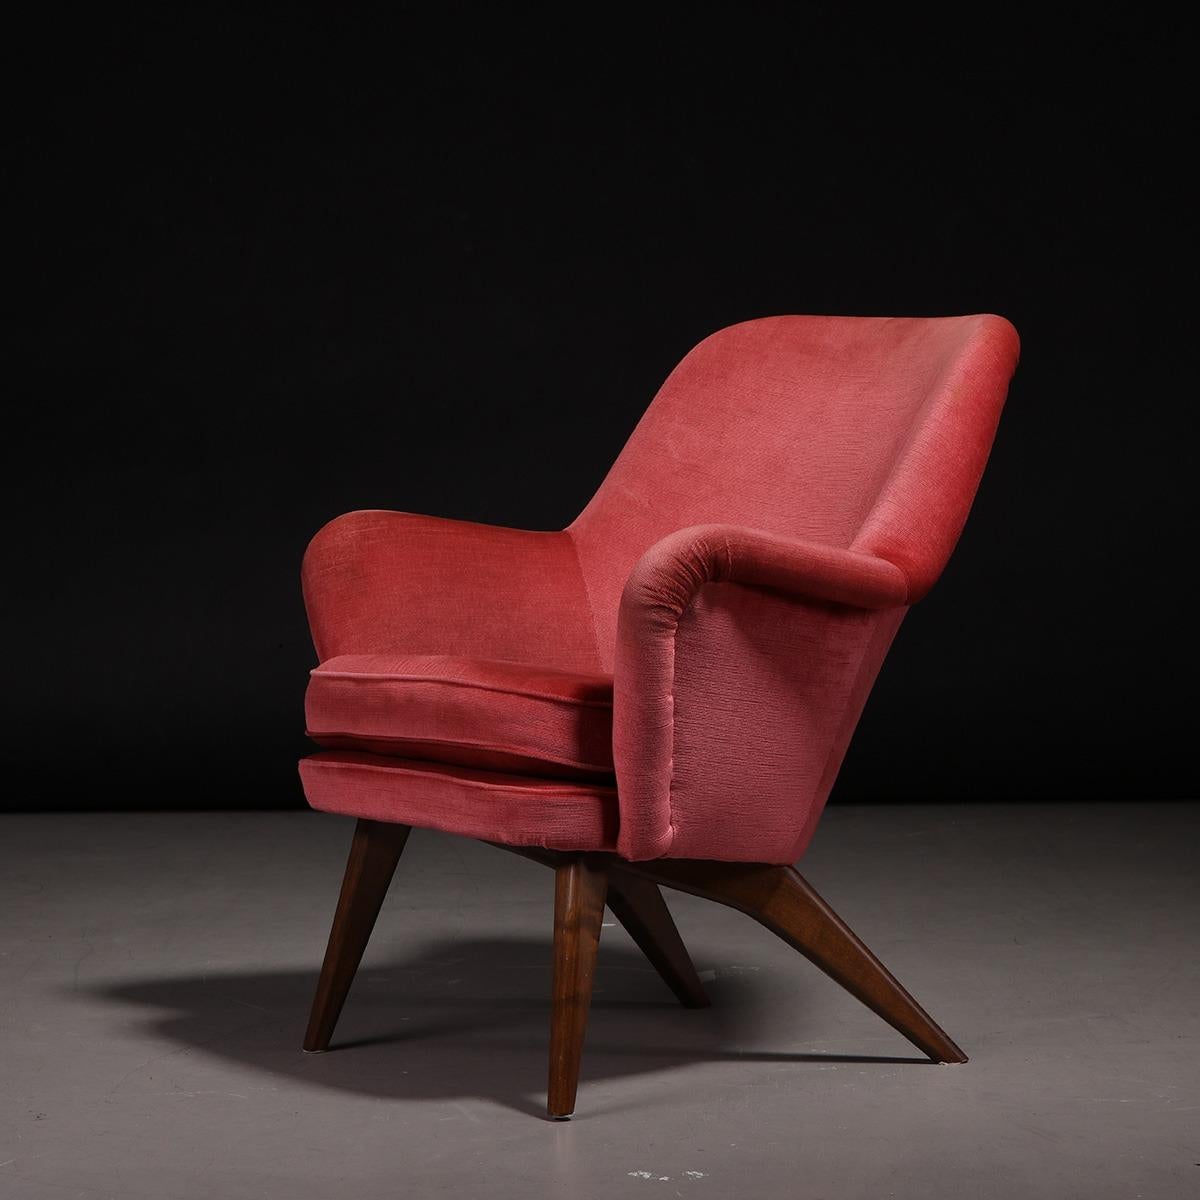 Finnish lounge armchair model Pedro designed by Carl Gustaf Hiort af Ornäs for Puunveisto Oy in Finland, 1950s.

This elegant armchair model by the Finnish architect Carl Gustaf Hiort features an extraordinary sculptural design mainly achieved of